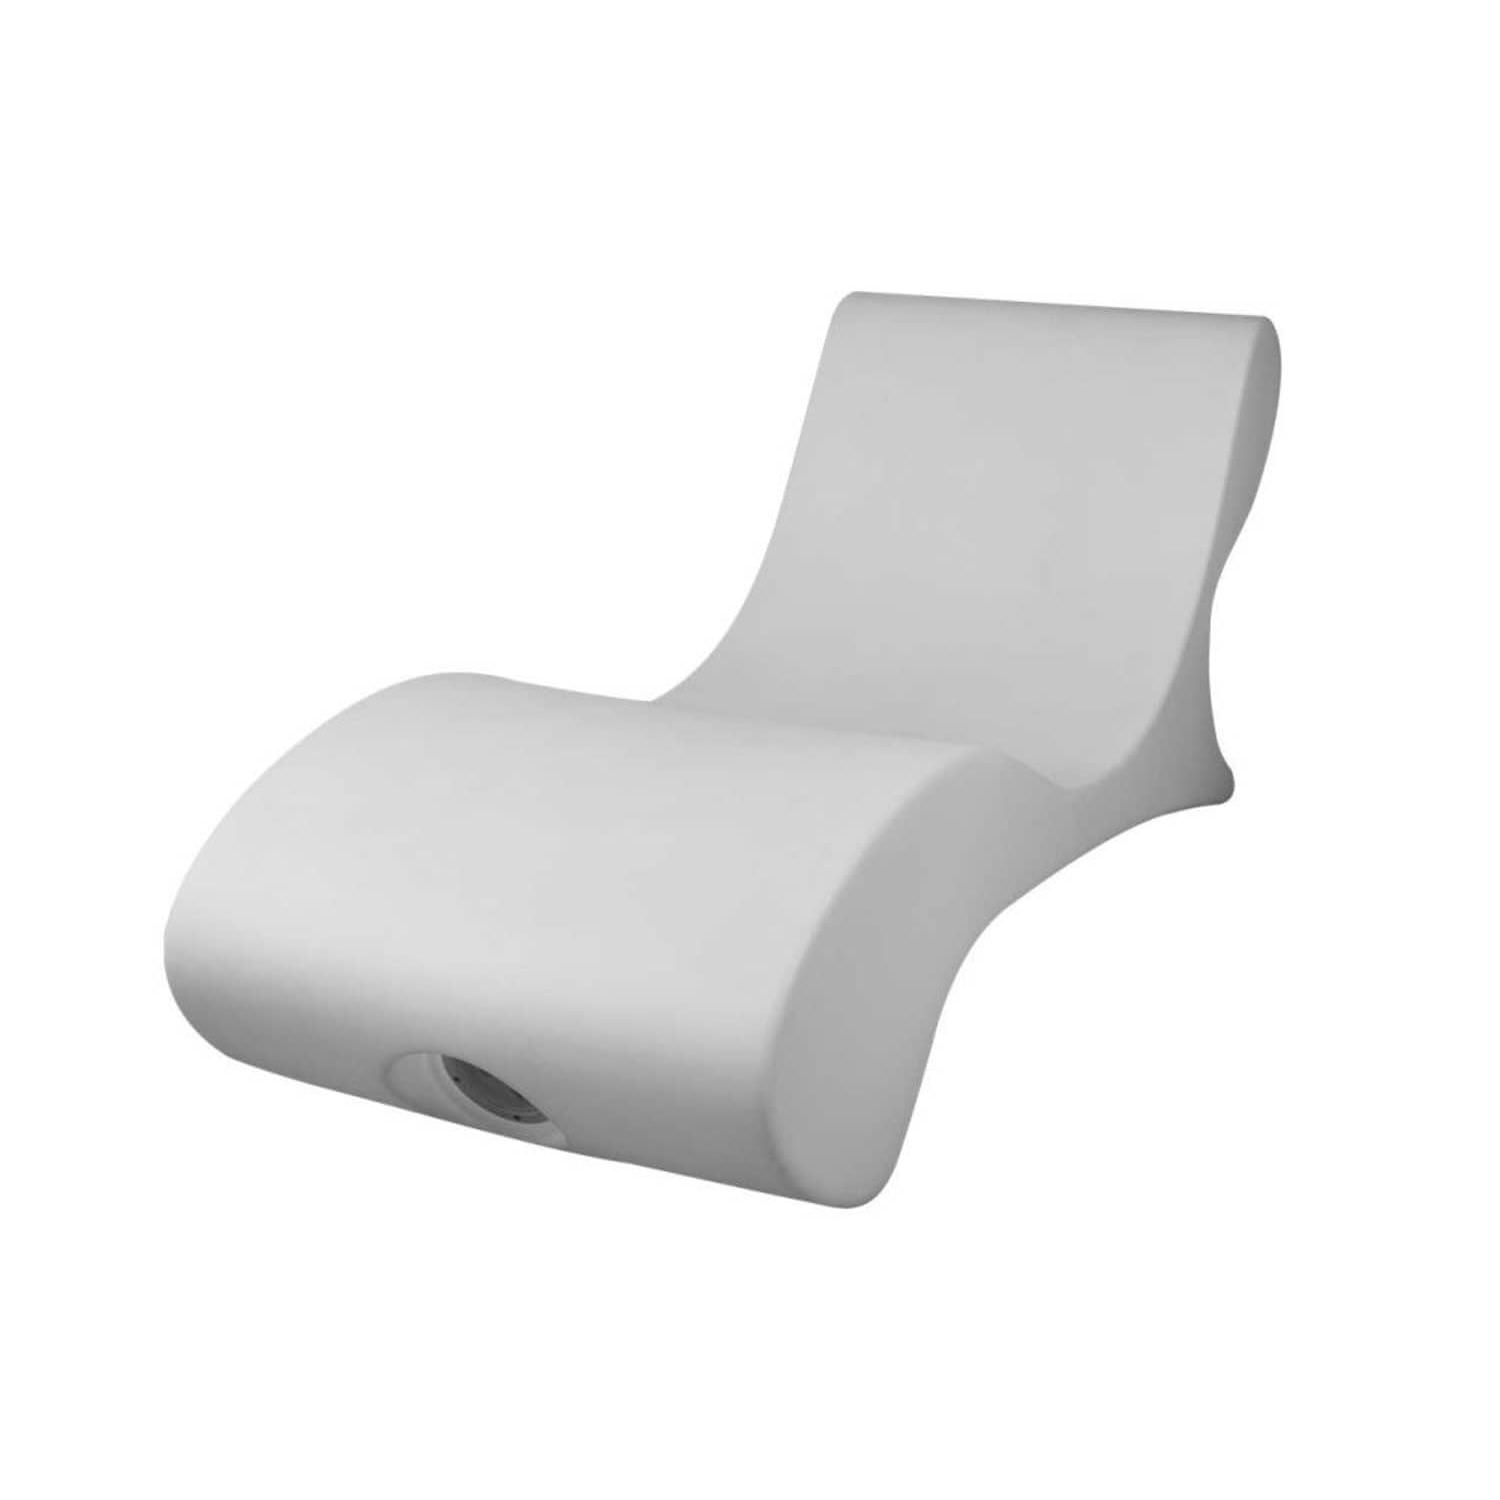 Chaise Longue On Offer